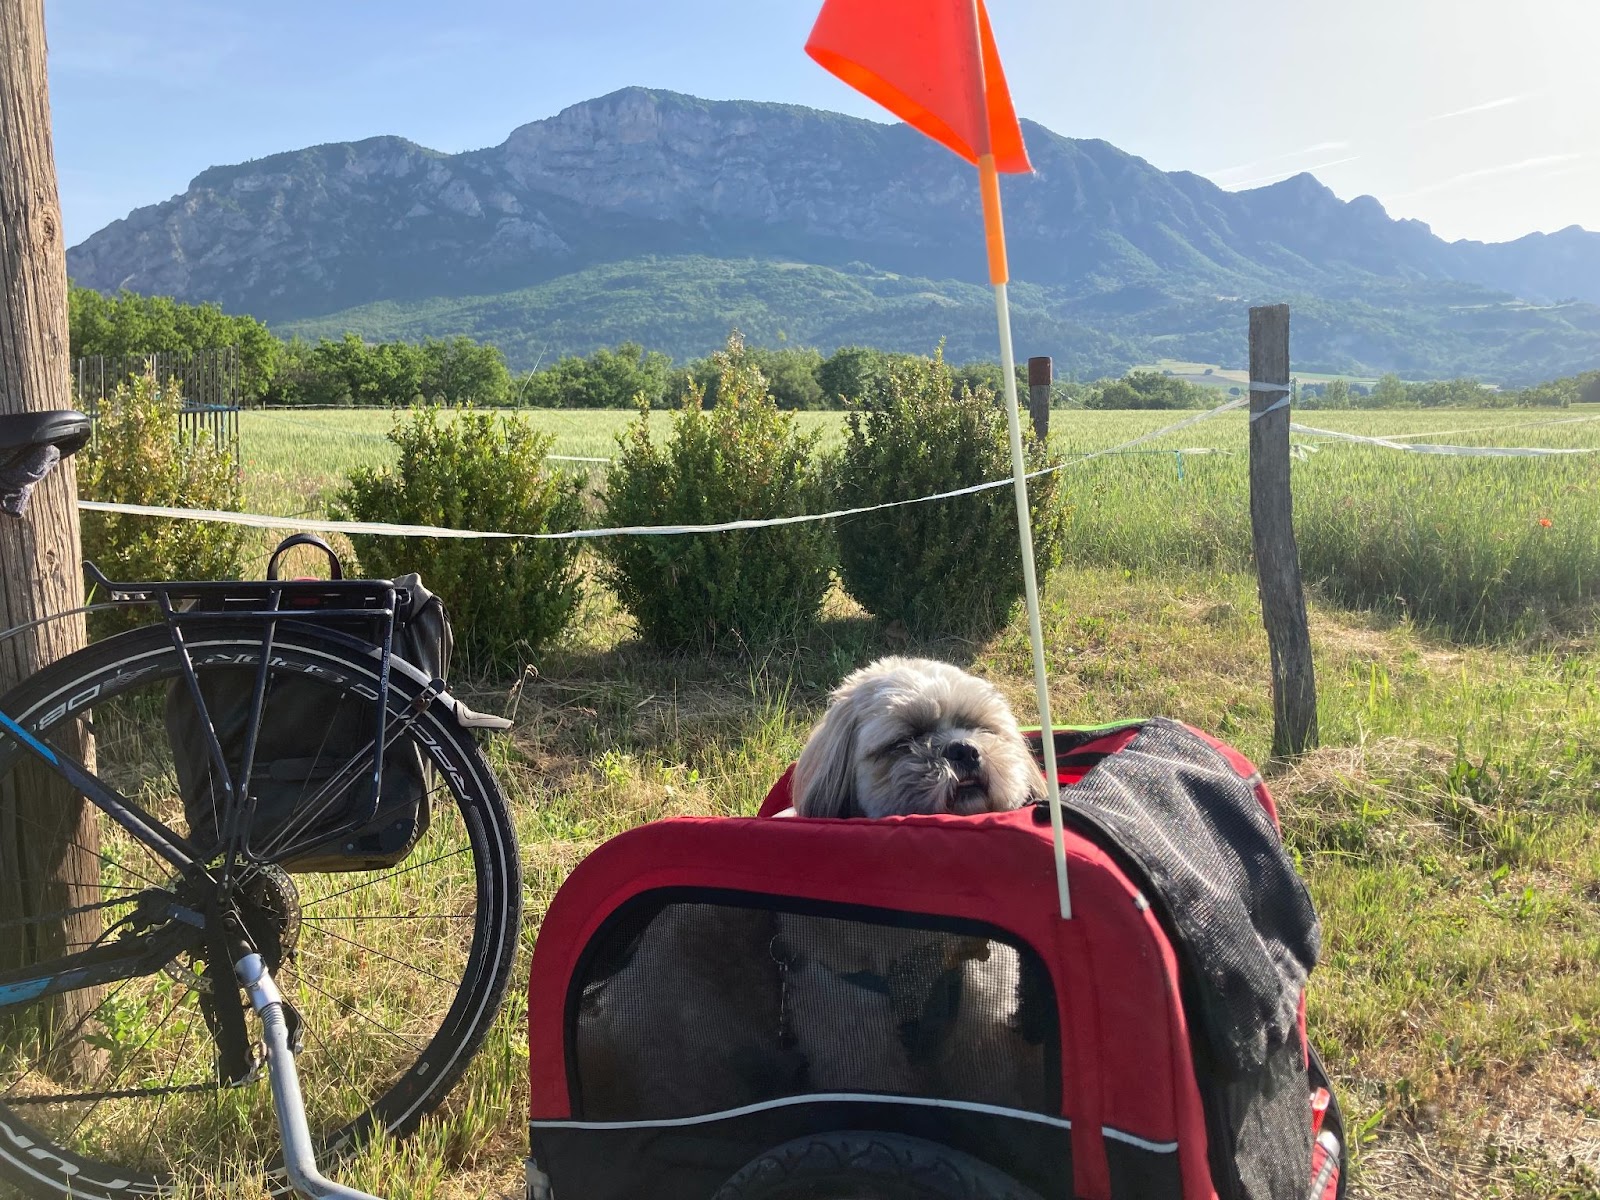 Photo showing a small white dog in a red chariot hooked up to a bike in front of a beautiful mountain landscape. The dog is scrunching up its face in the sun, giving it a goofy expression.